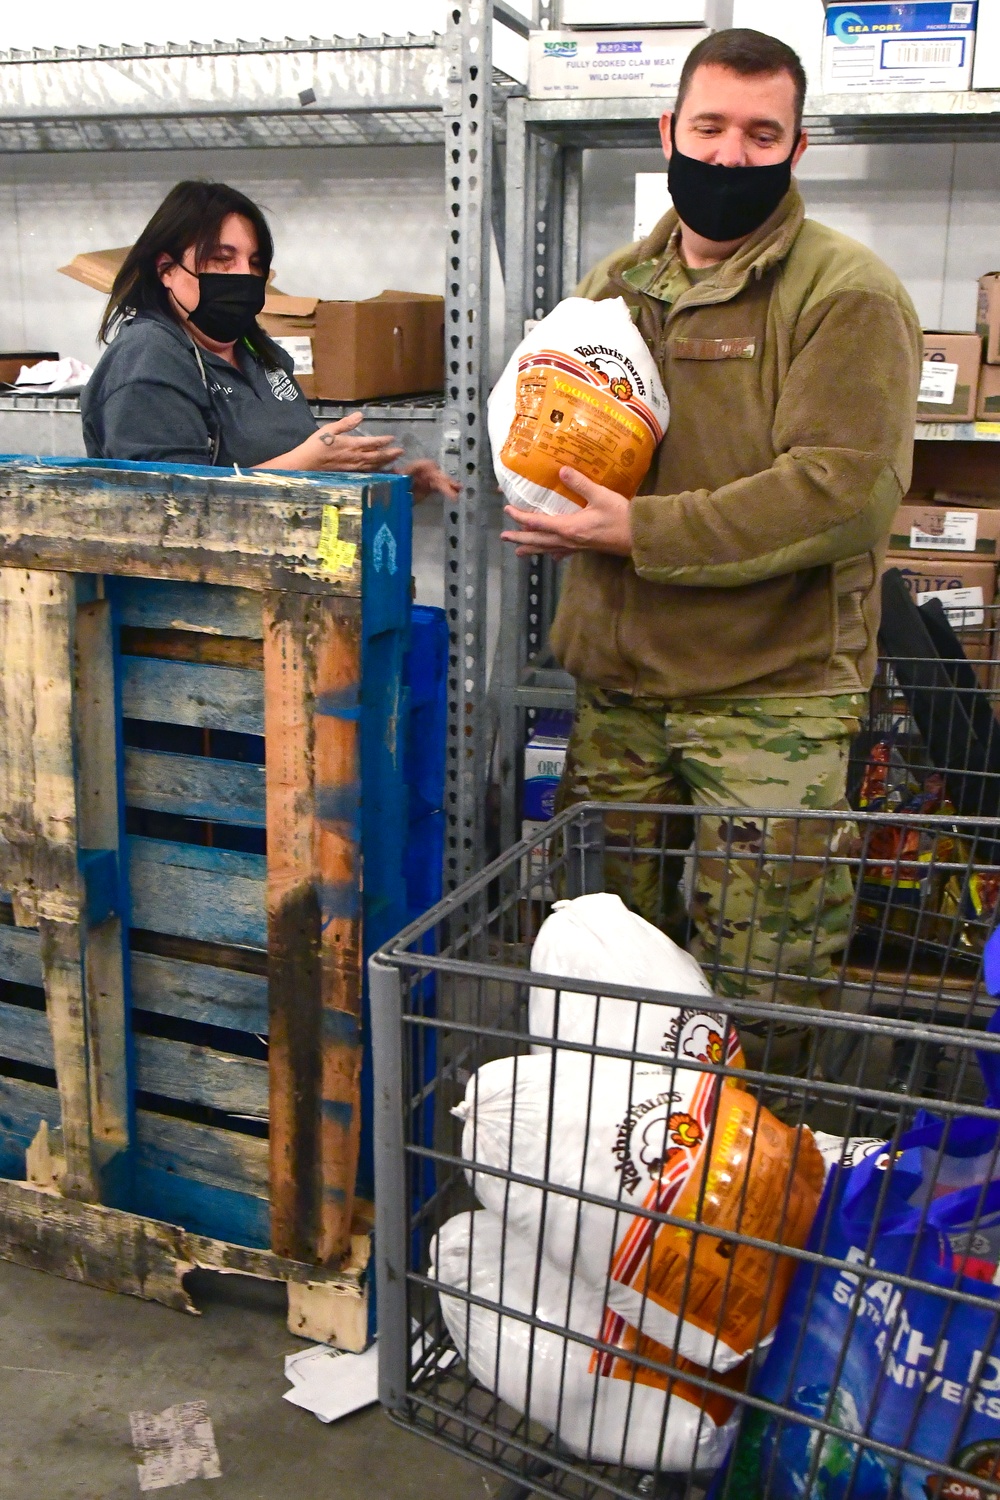 150 military families receive Thanksgiving meals